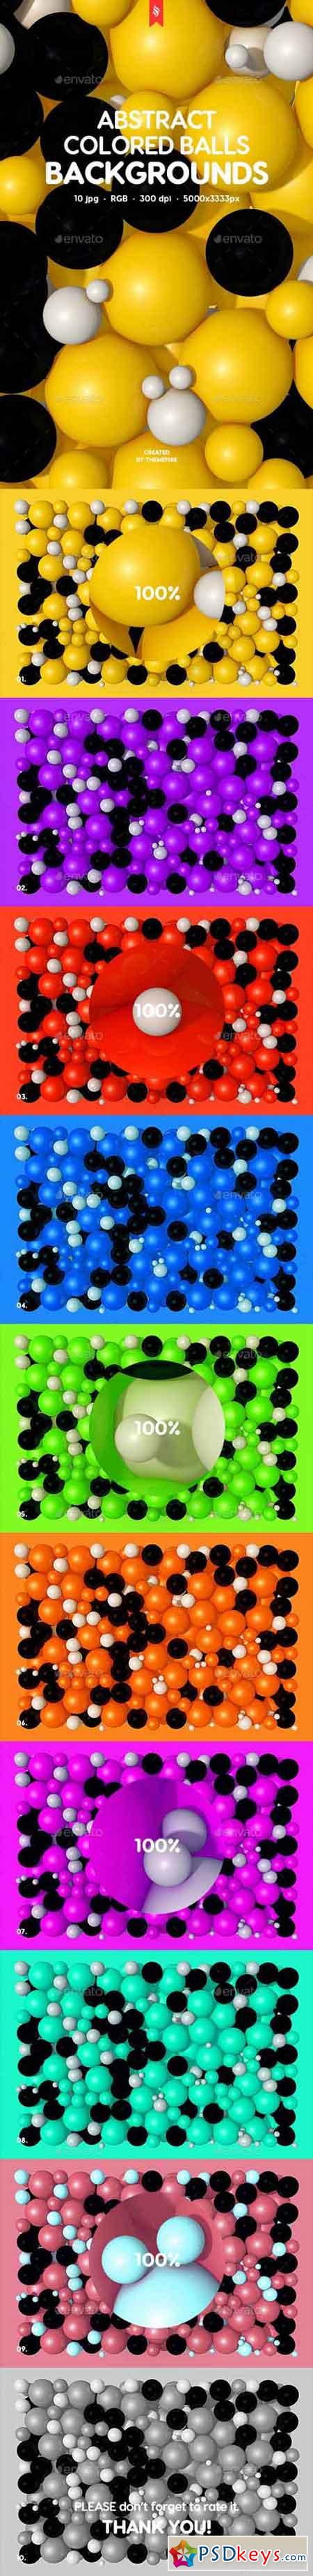 Colored Balls Backgrounds 20762026